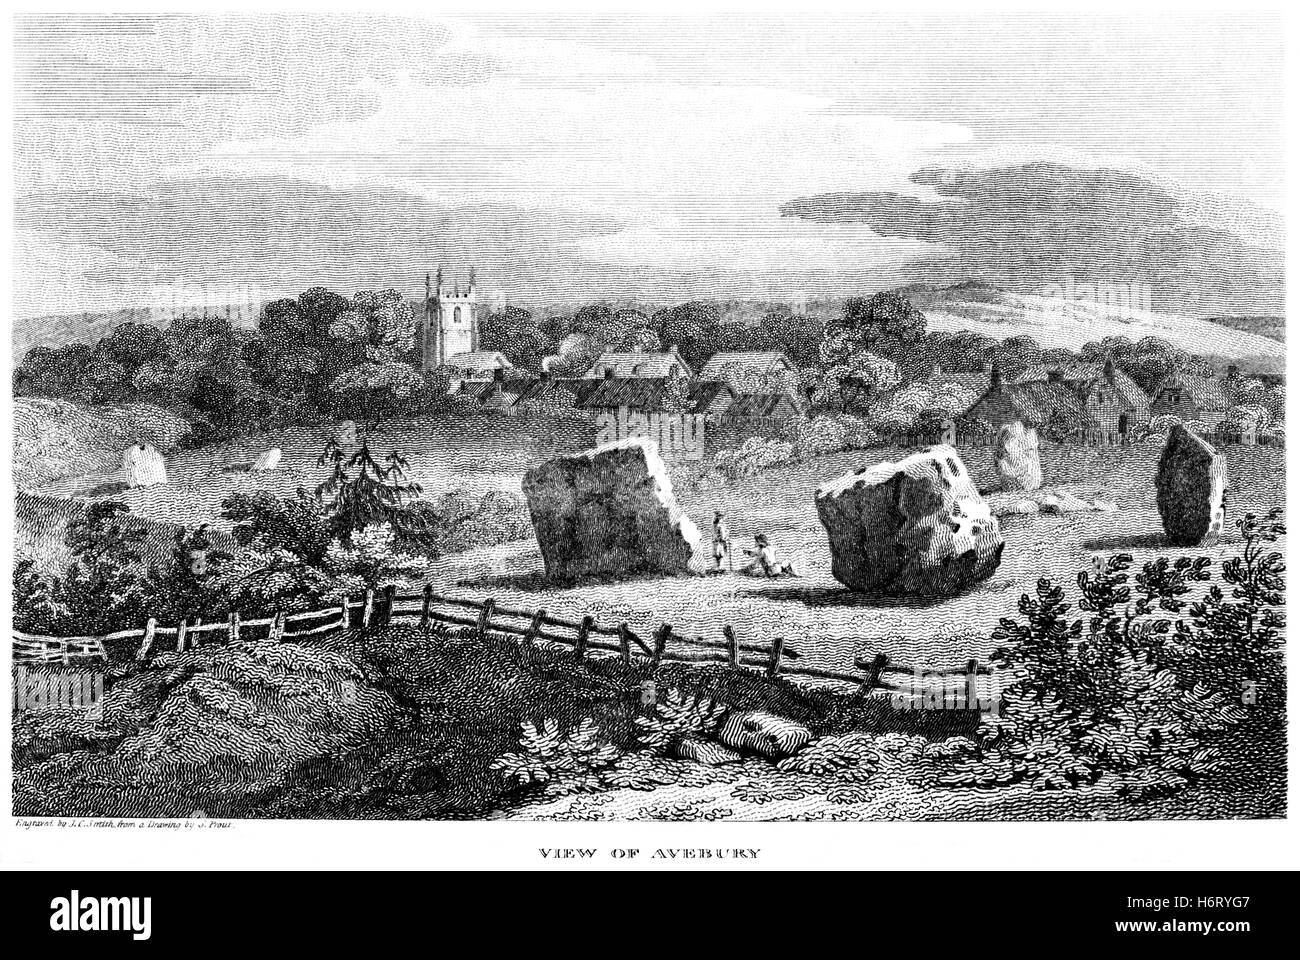 An engraving of Avebury, Wiltshire scanned at high resolution from a book printed in 1812. Believed copyright free. Stock Photo